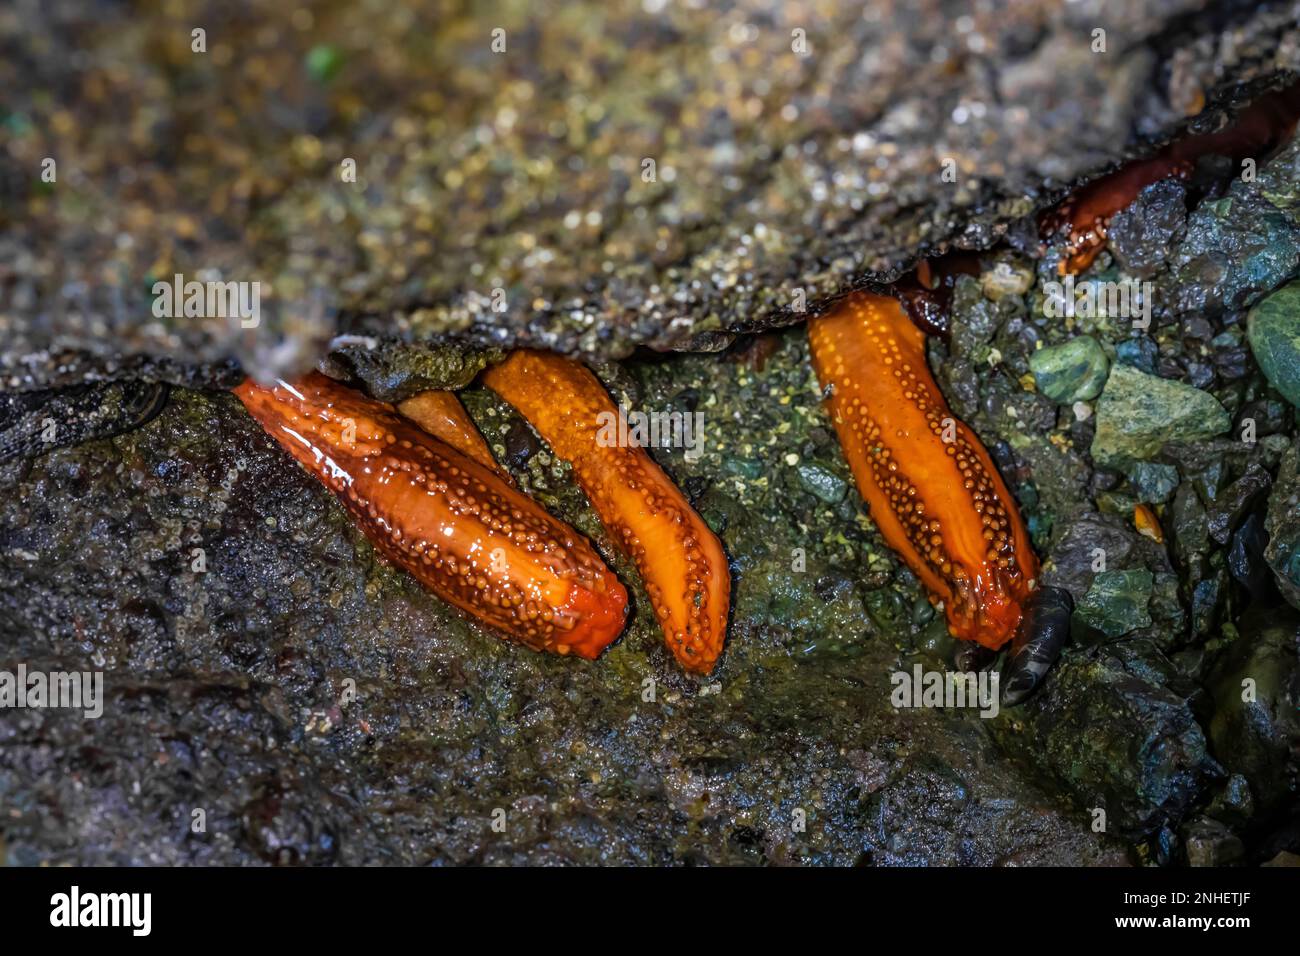 Red Sea Cucumber, Cucumaria miniata, closed up, at Point of Arches in Olympic National Park, Washington State, USA Stock Photo